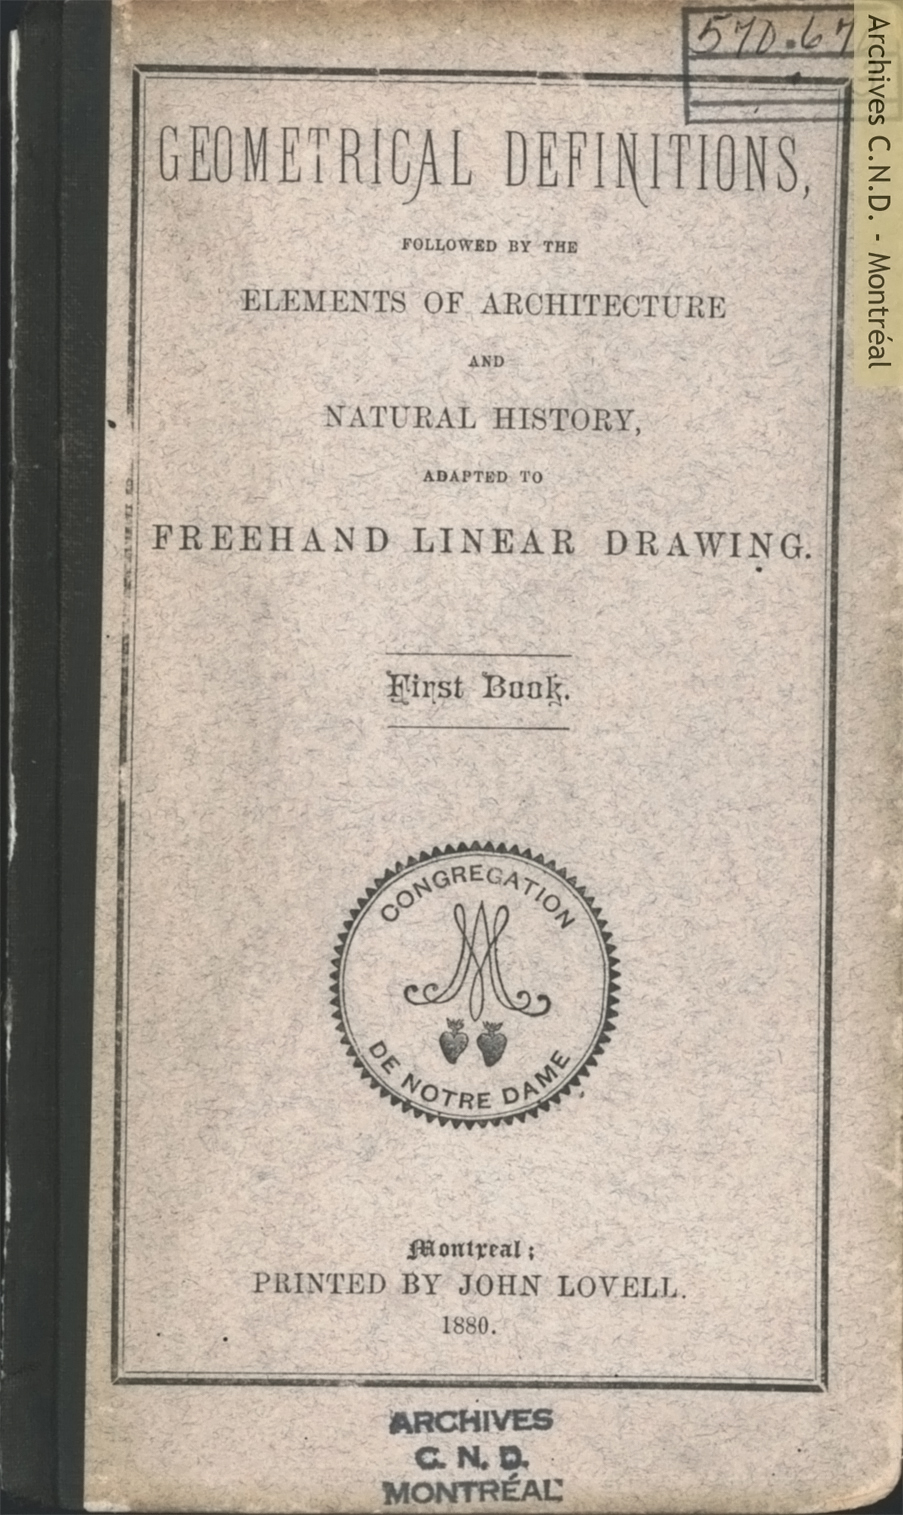 Page couverture - Geometrical definitions, followed by the elements of architecture and natural history, adapted to Freehand Linear Drawing - First book